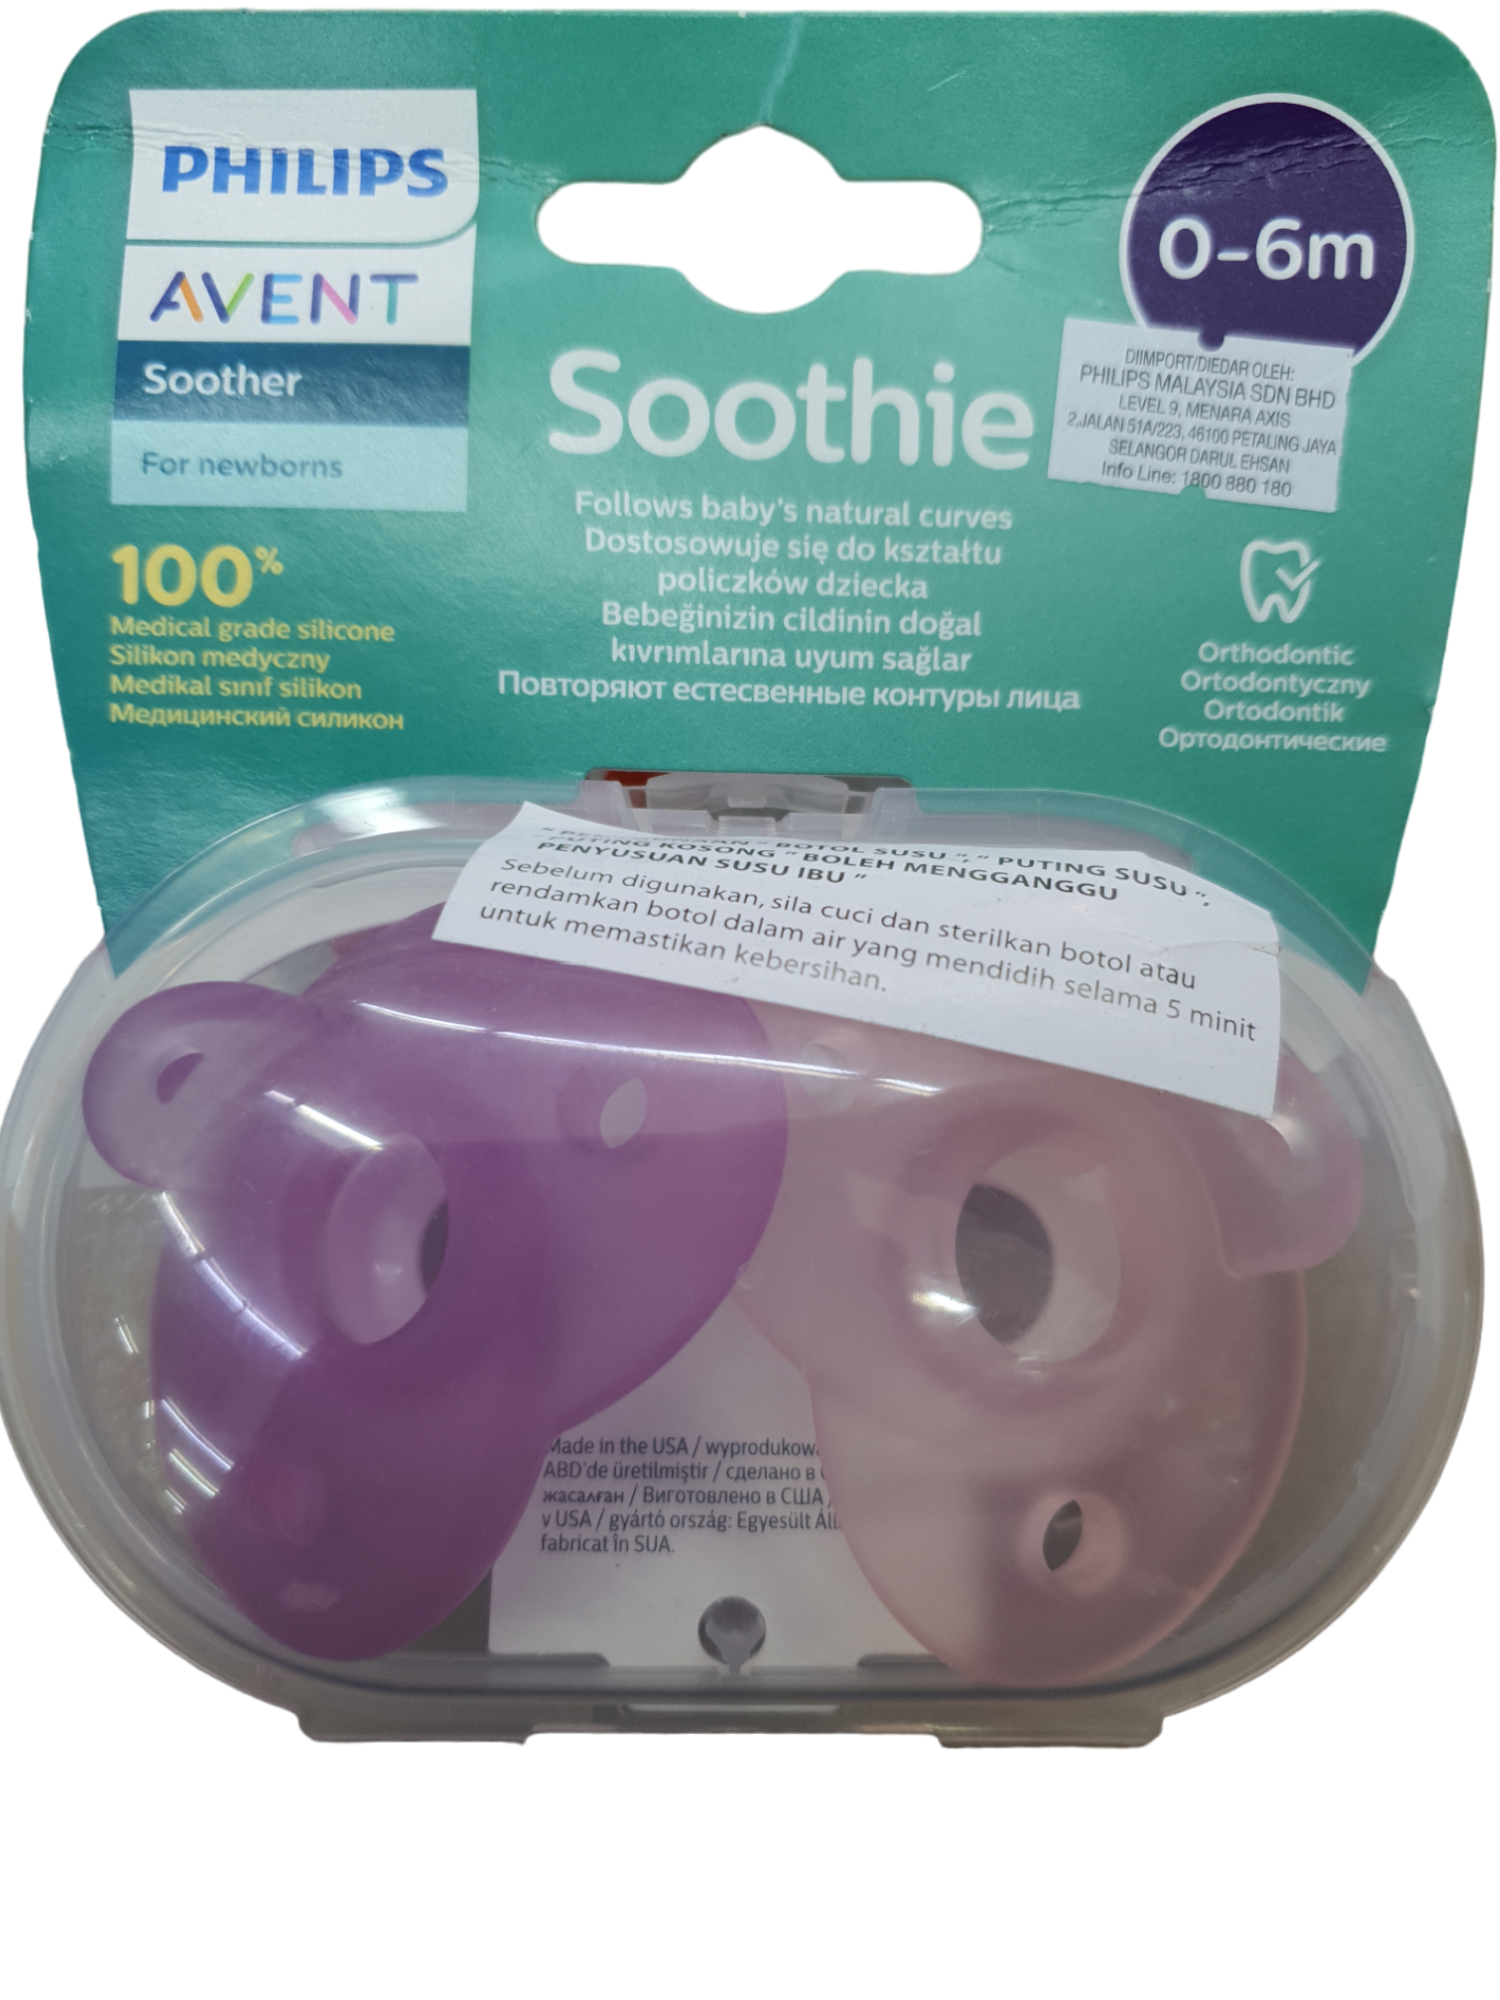 Philips Avent Soother Soothie 0-6m+